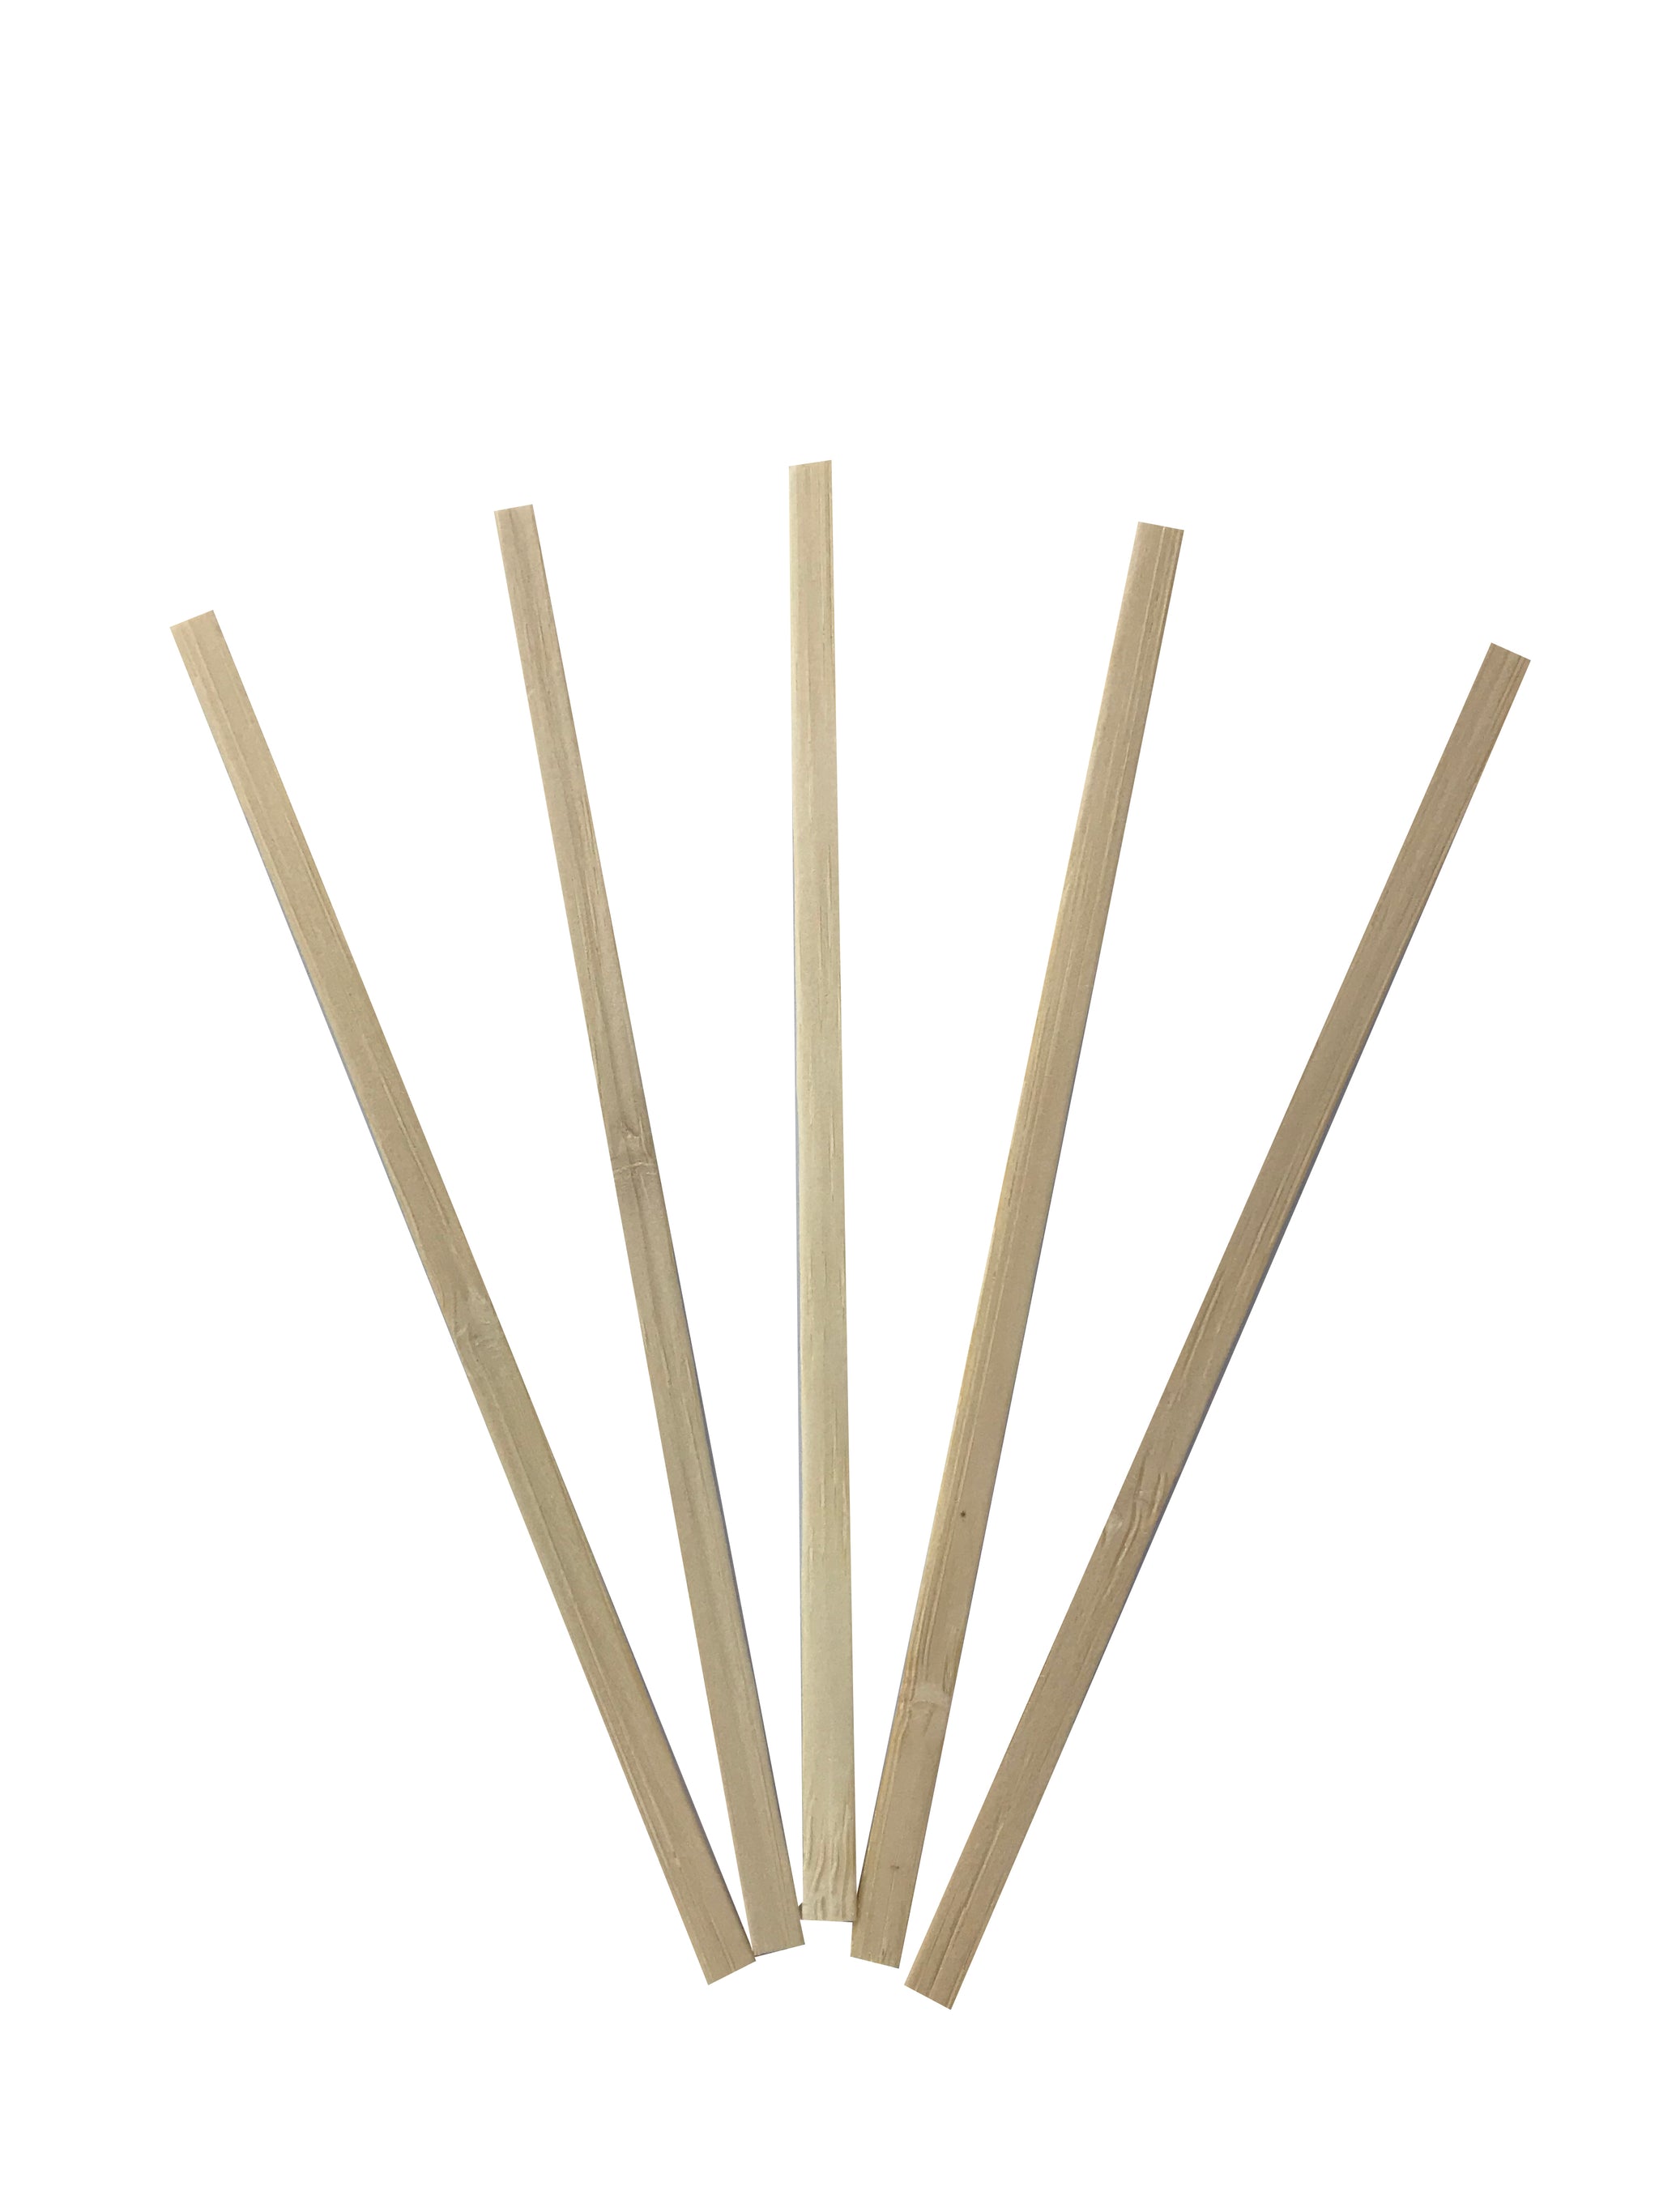 Cocktail Paddle Drink Stirrers - Wholesale Bamboo toothbrushes